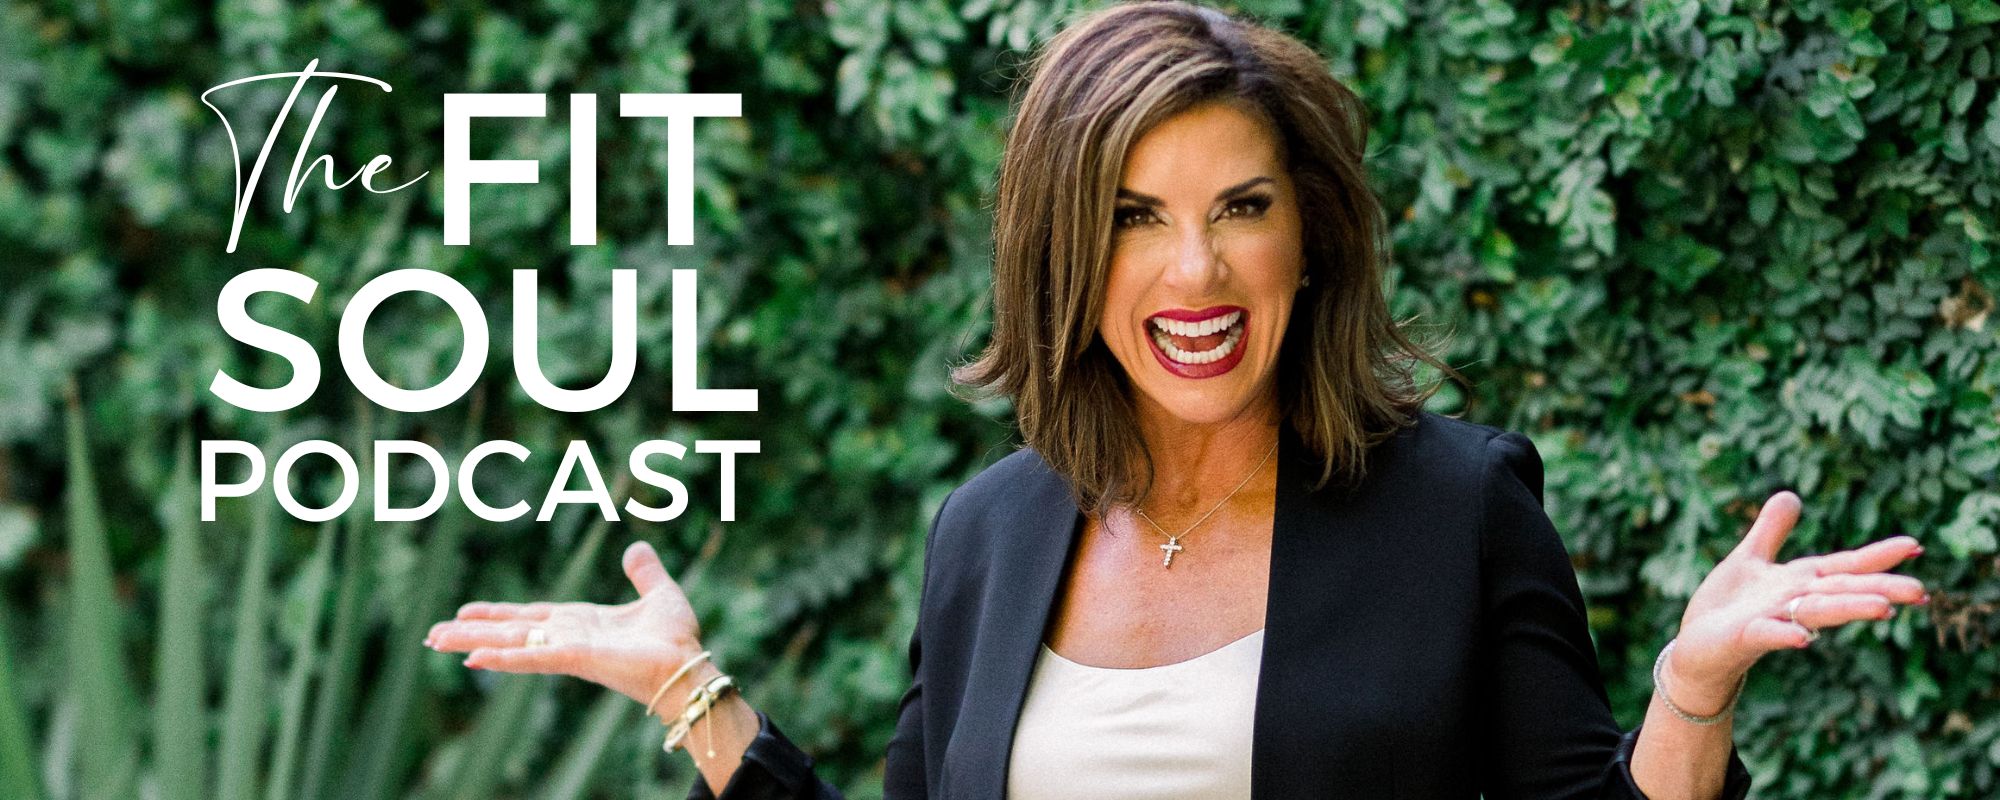 The Fit Soul Podcast with Amy Ramsey